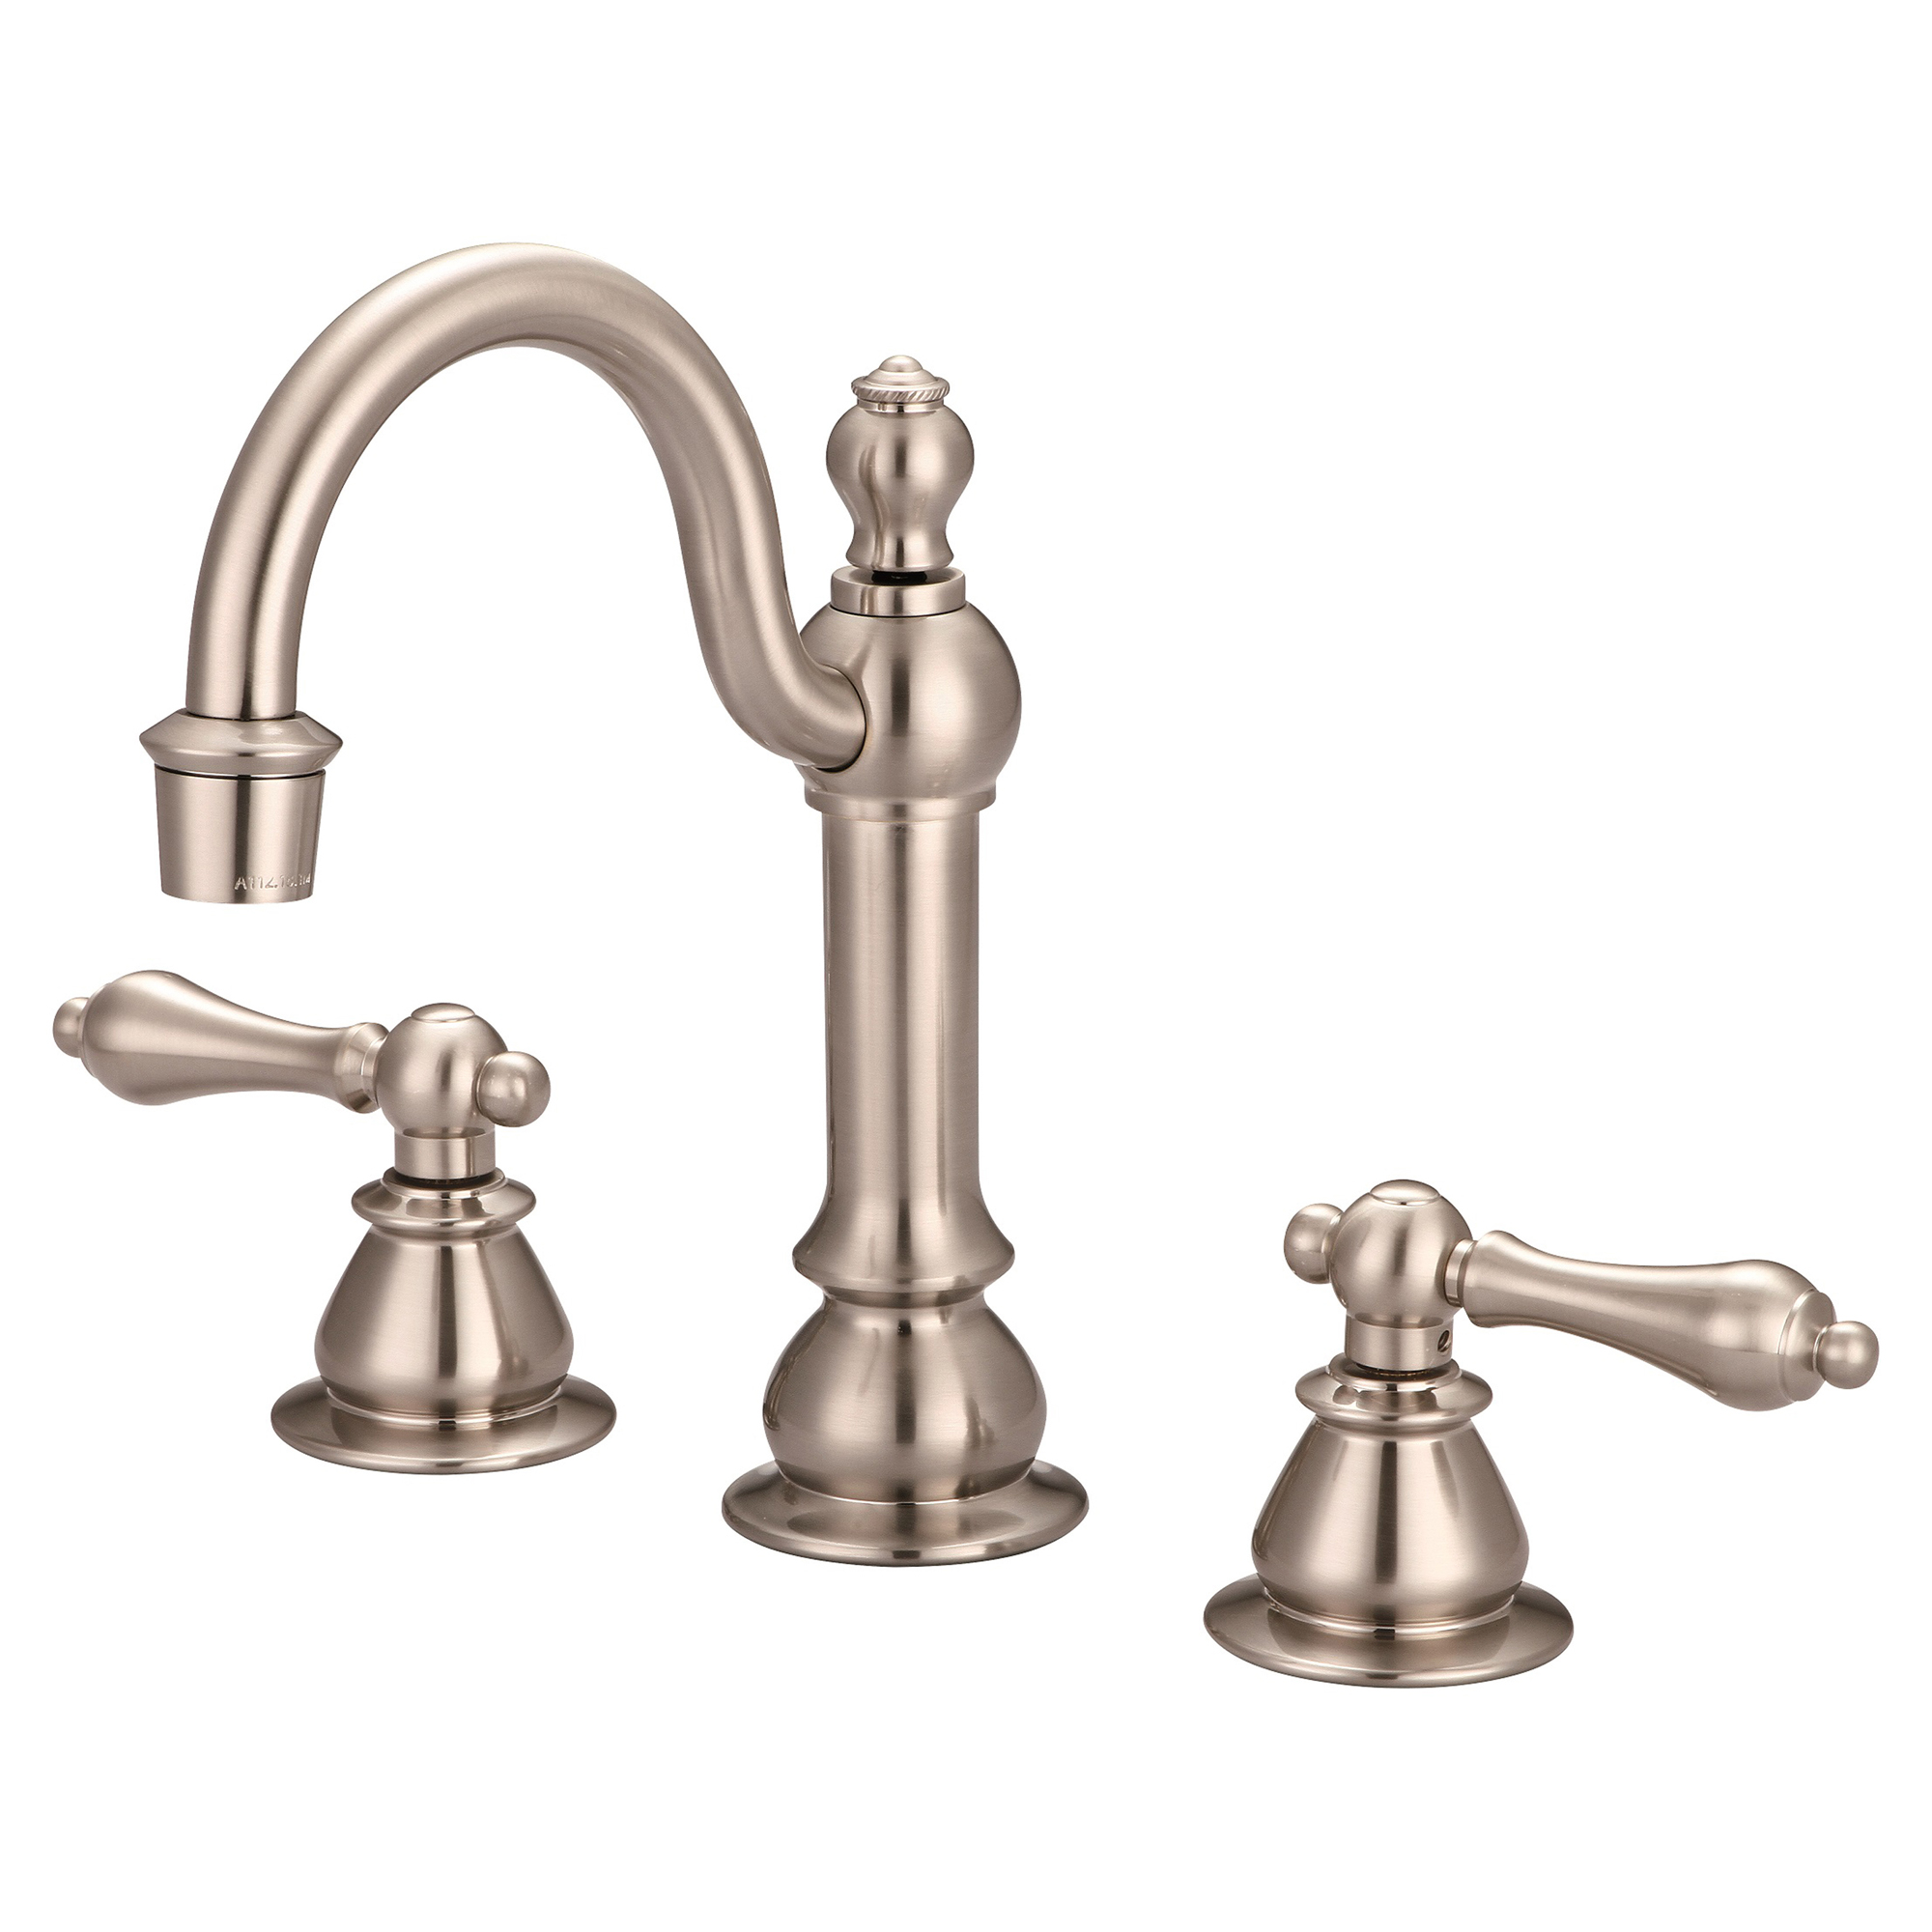 American 20th Century Classic Widespread Lavatory Faucets With Pop-Up Drain in Brushed Nickel Finish With Metal Lever Handles